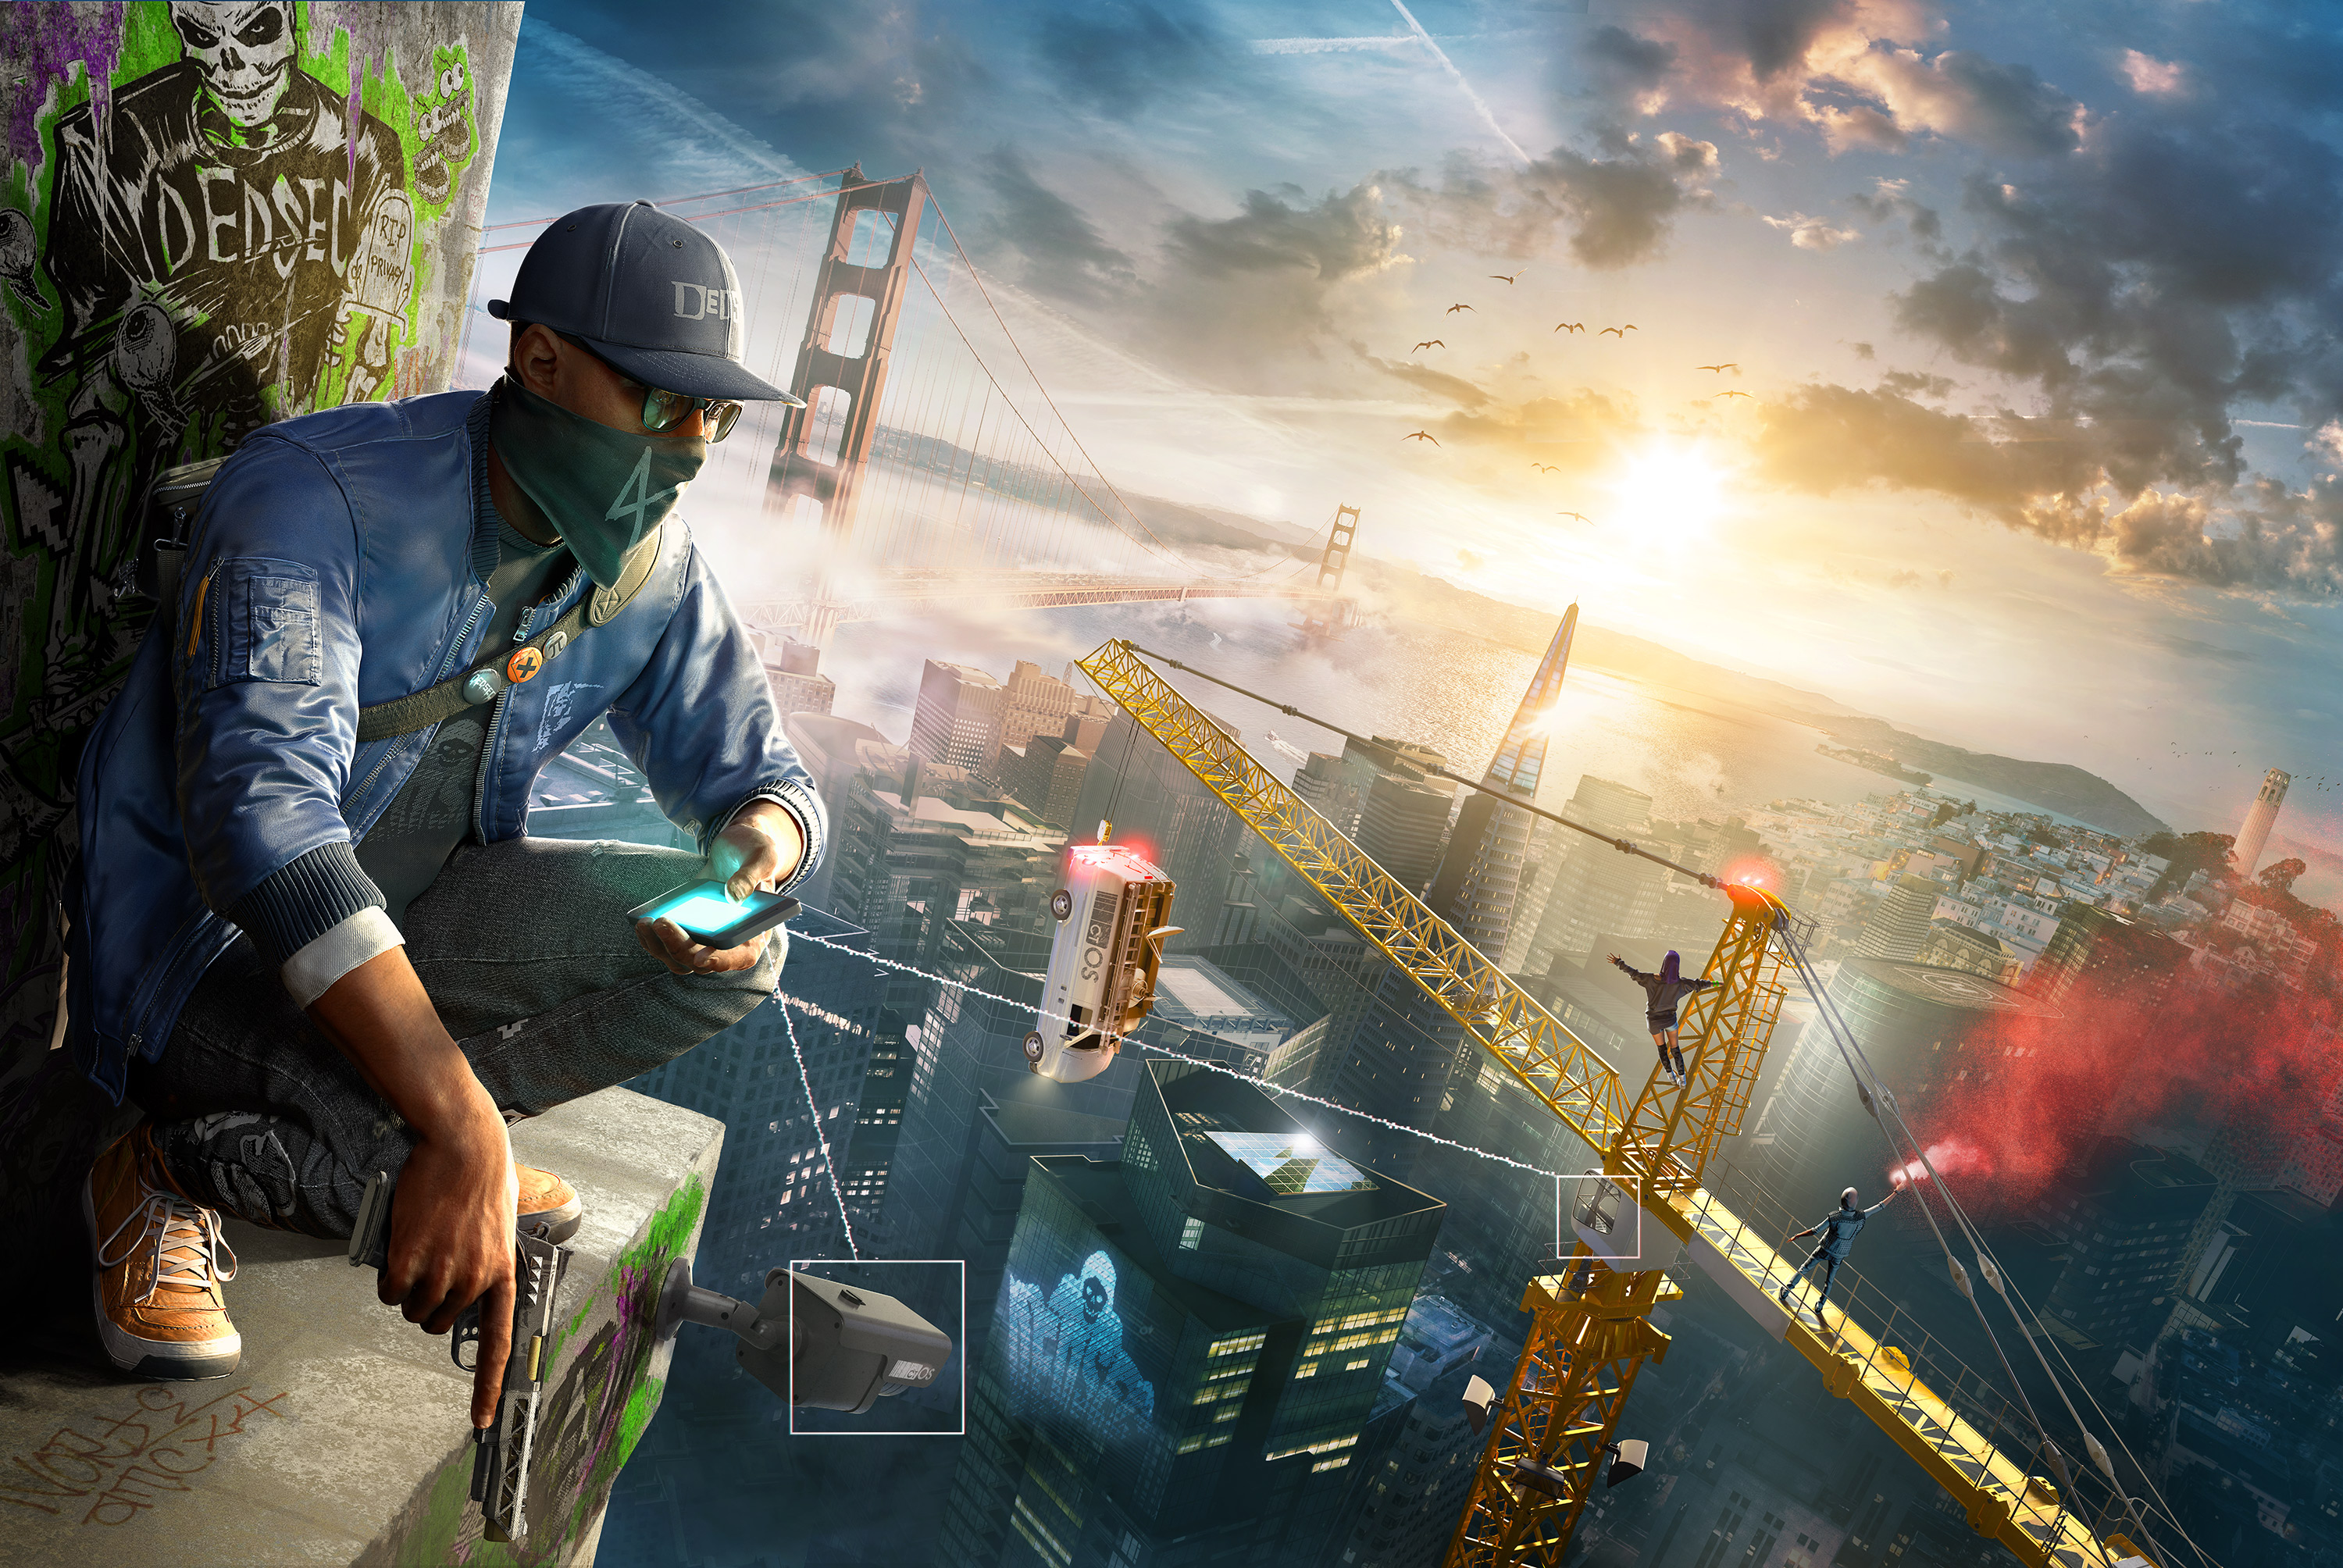 Watch Dogs 2 #3